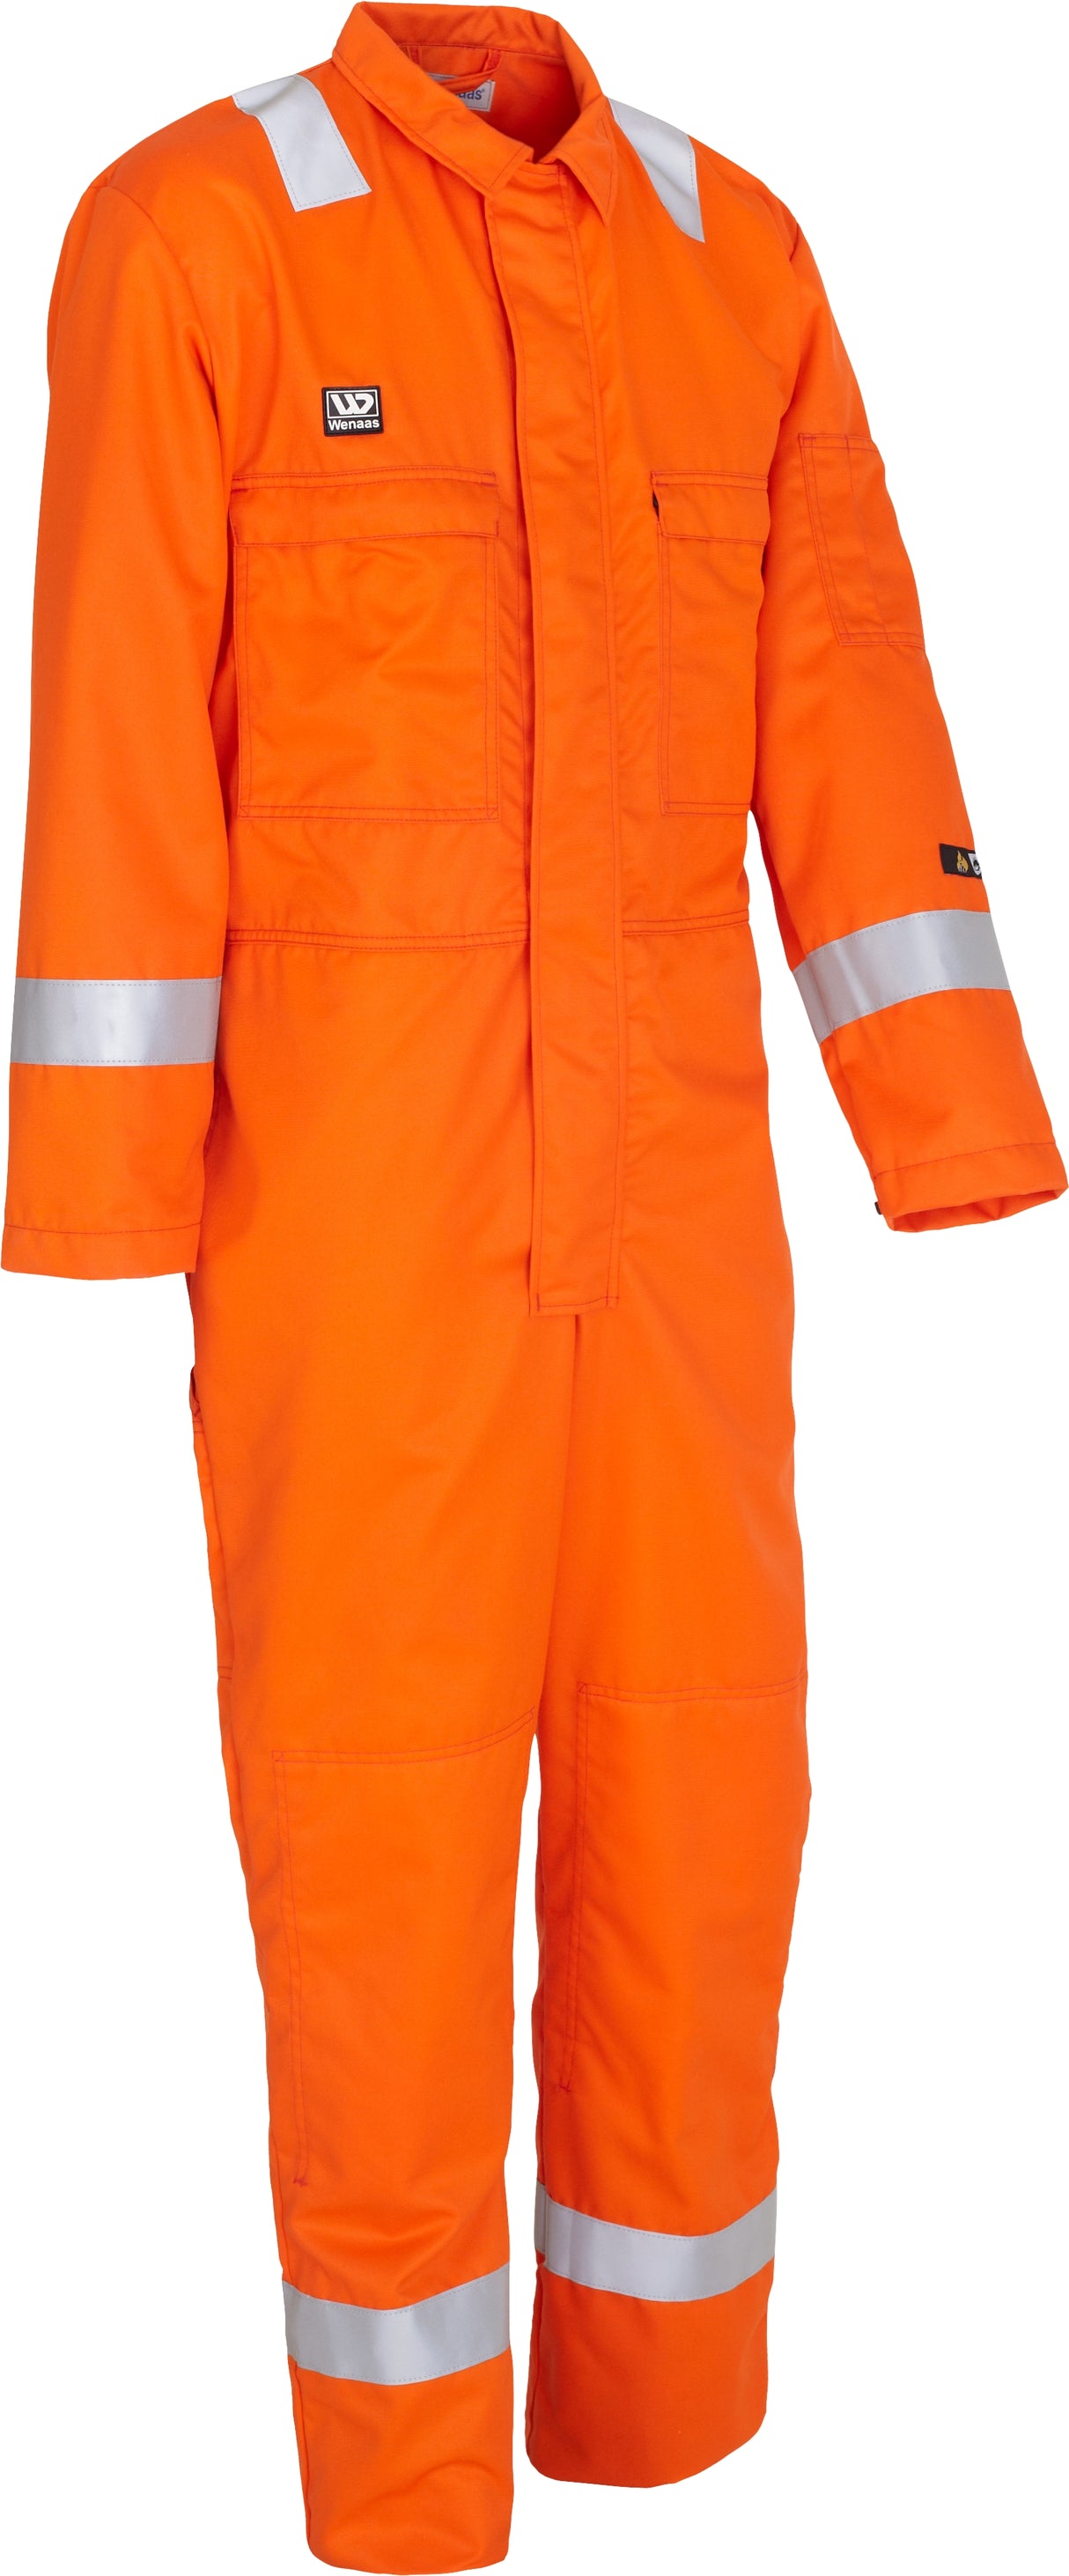 Wenaas 80926-16101 Nomex Aramid Flame Retardant Electric Arc Protection FR Coverall